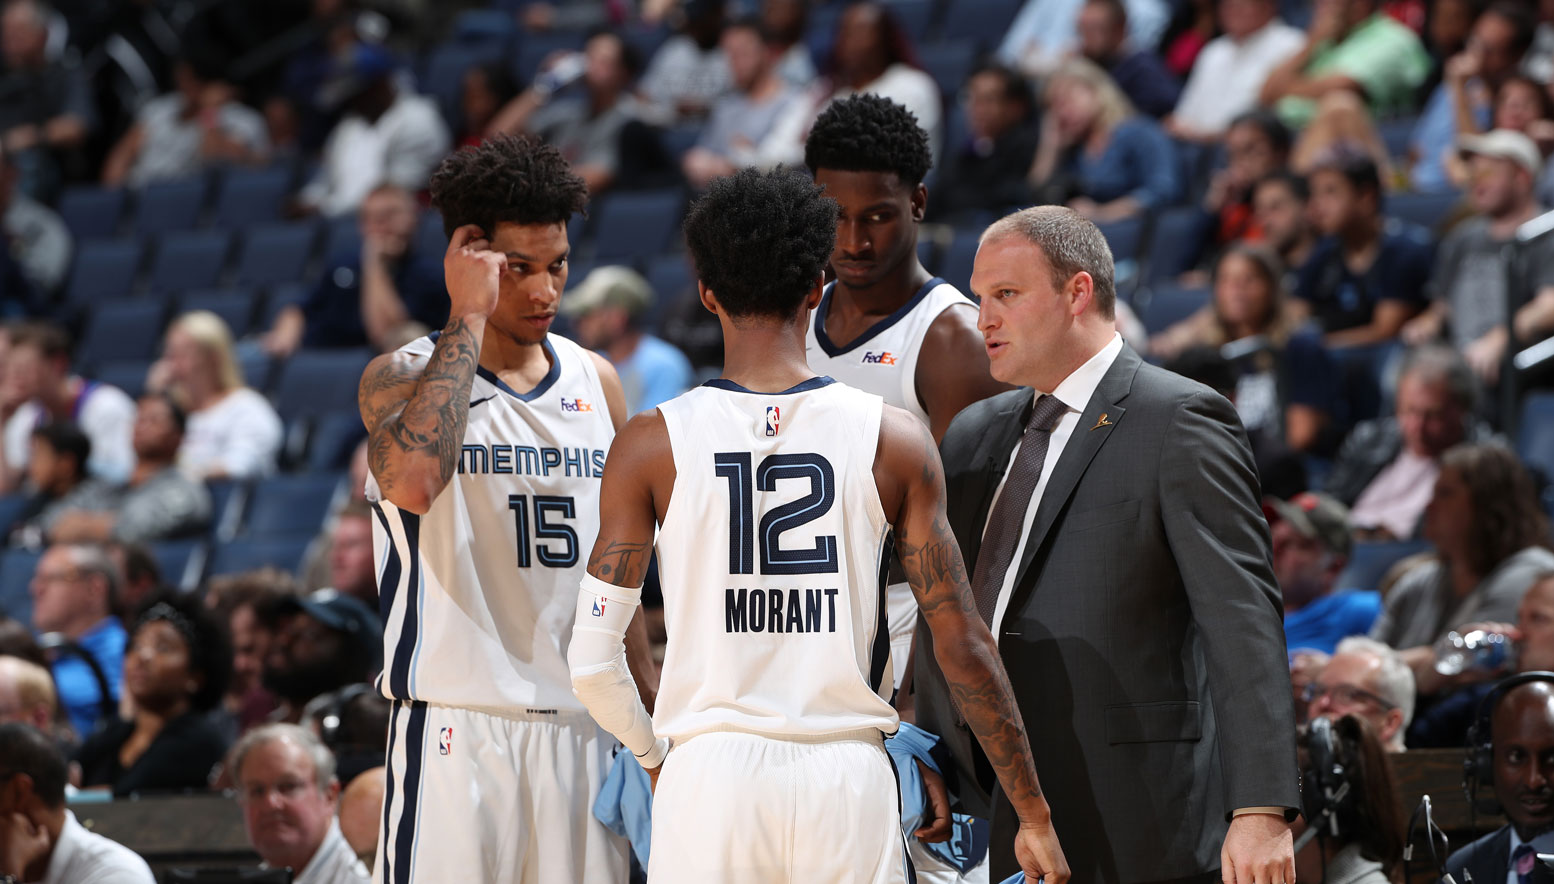 MikeCheck: NBA’s ‘Rising Stars’ game shines global spotlight on Grizzlies’ emerging young core